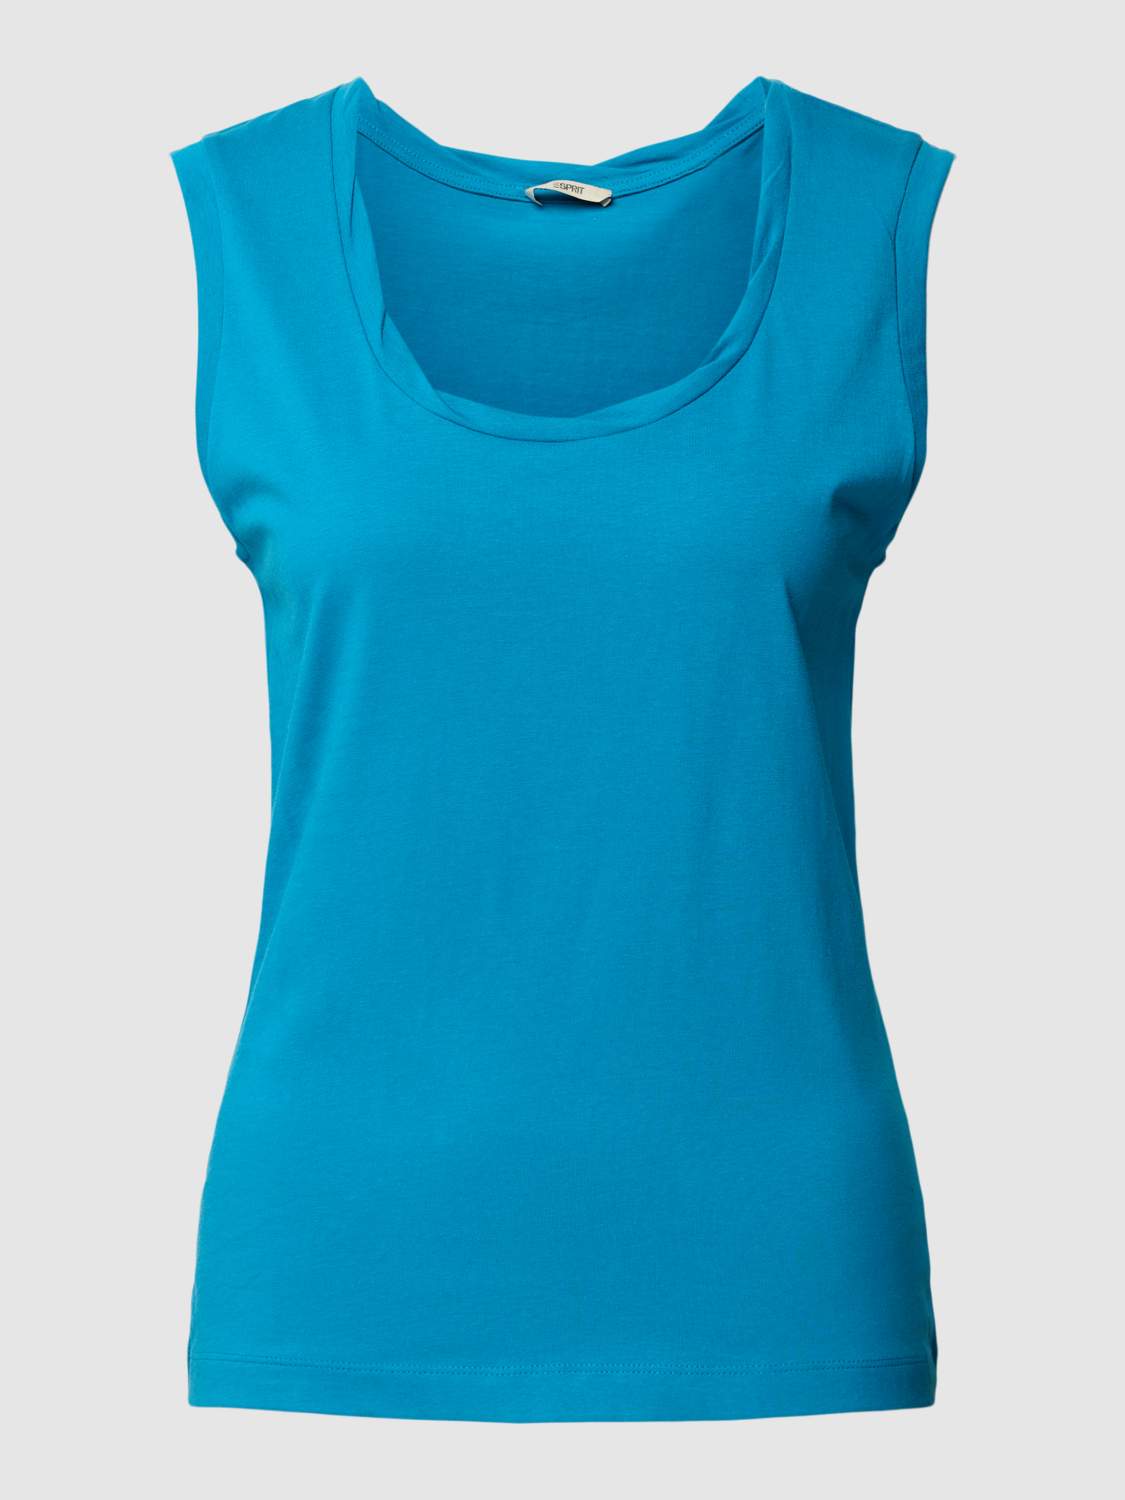 TOP TOP  The Turquoise Top – TOPTOP OUTFIT